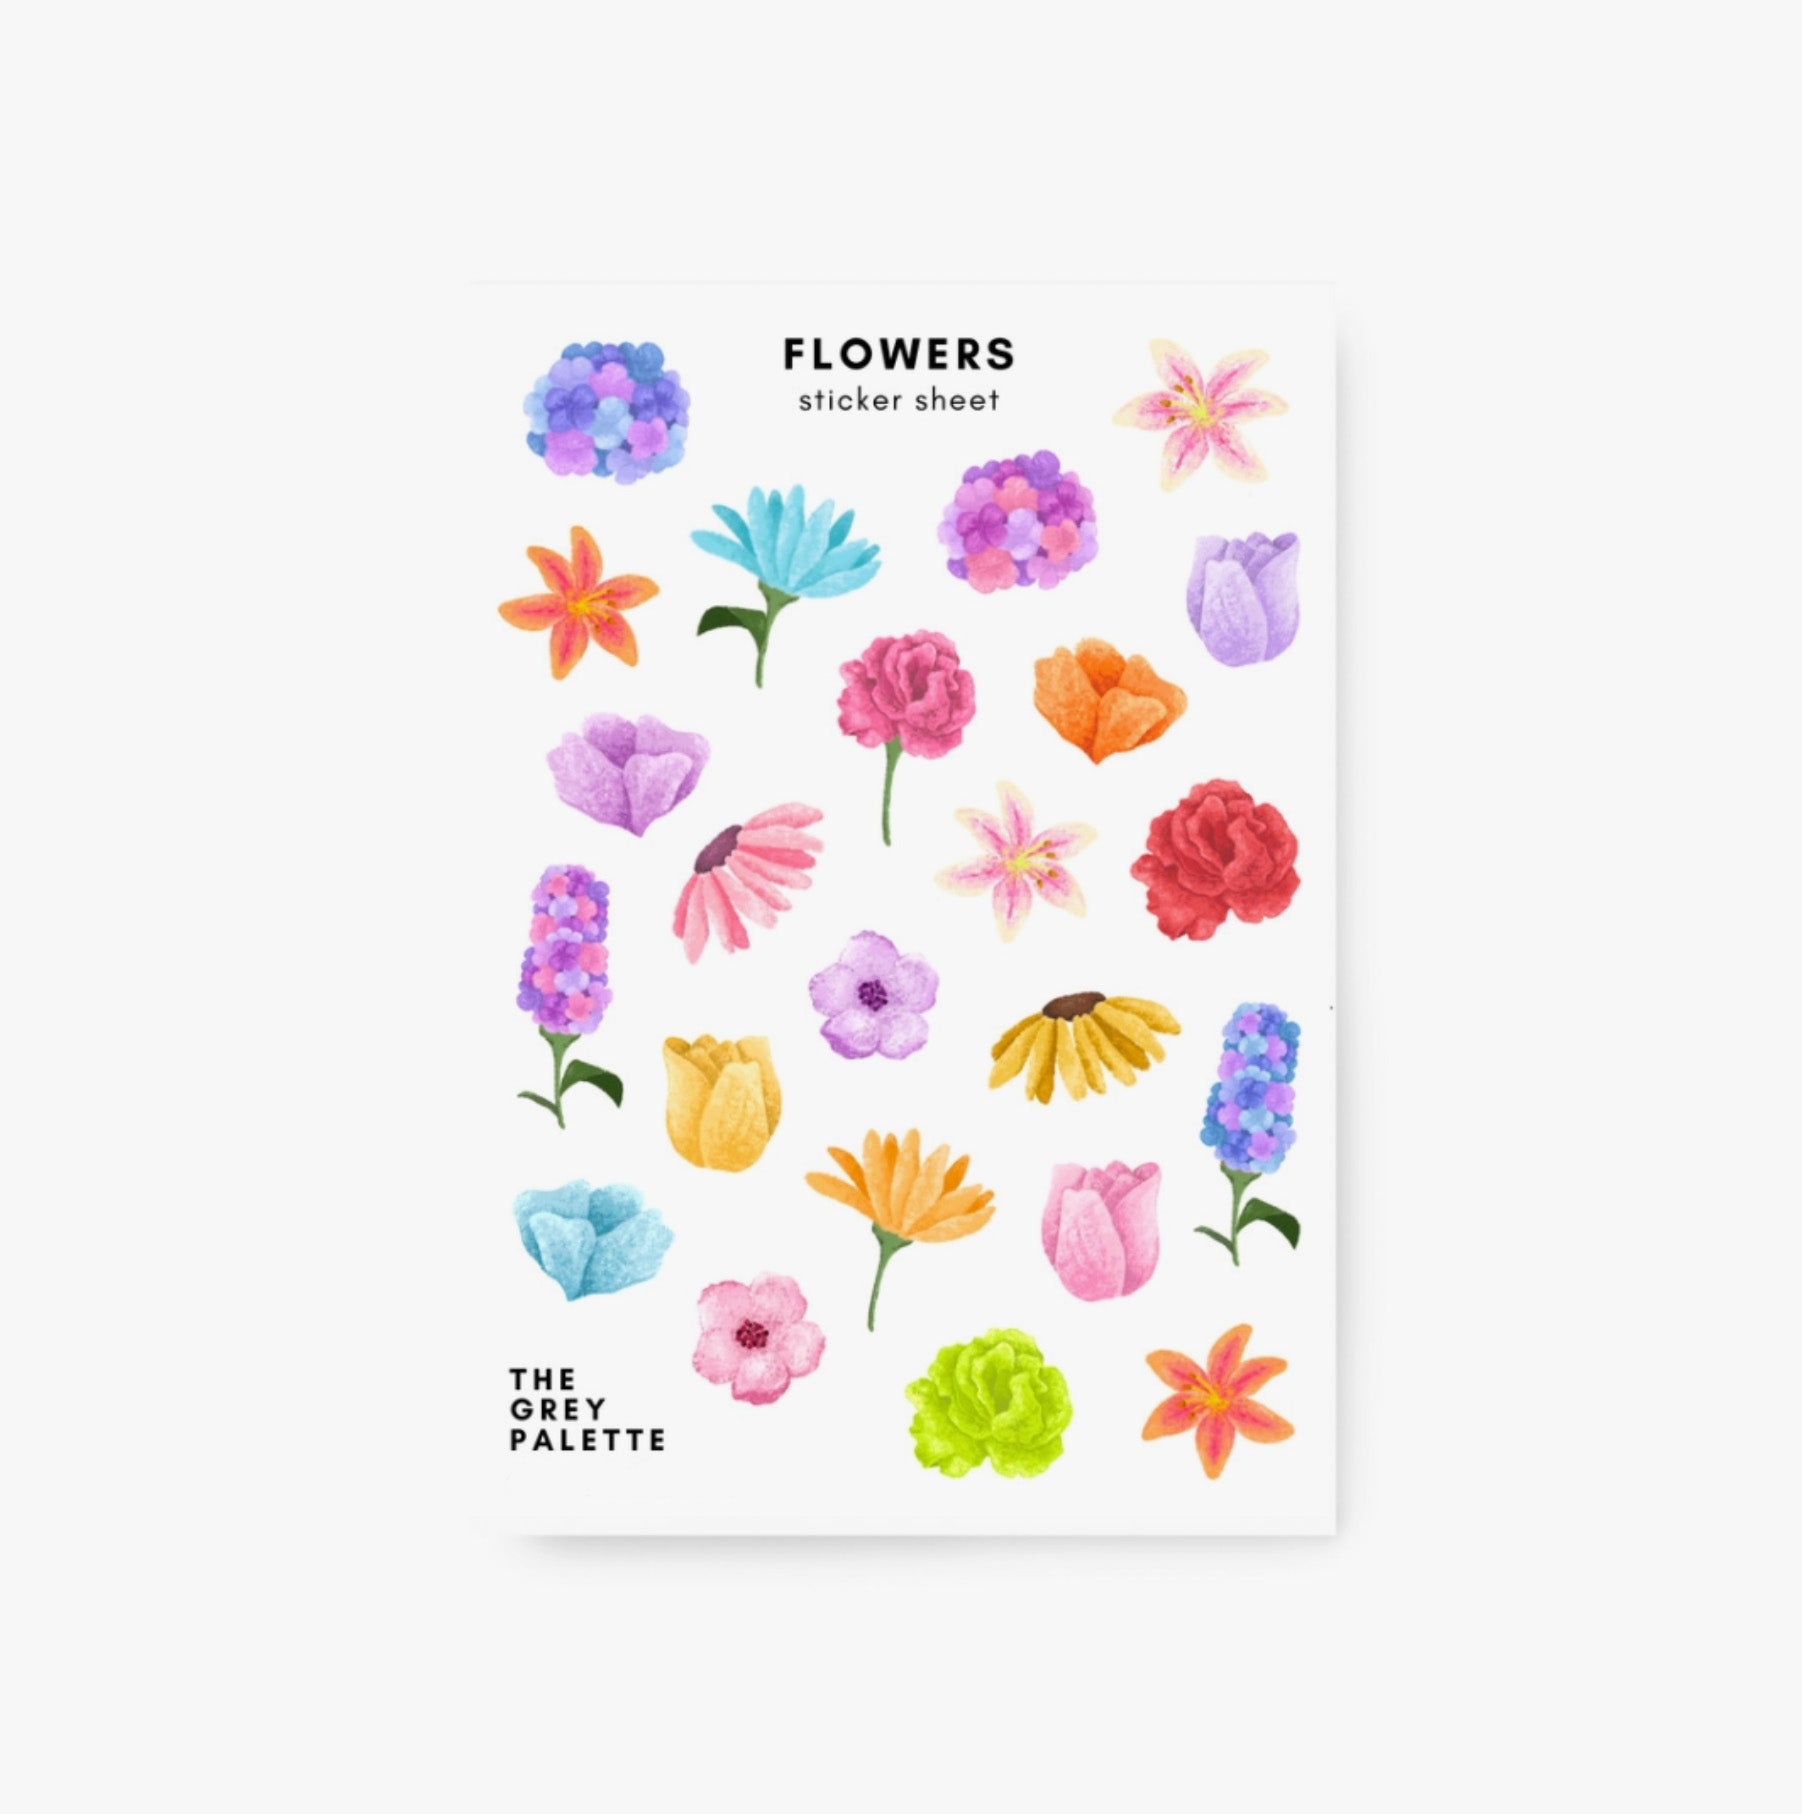 These floral sticker sheets are the perfect addition for your planner, BUJO or Calendar Spreads. Designed by The Grey Palette and sold at BBB Supplies Craft Shop.